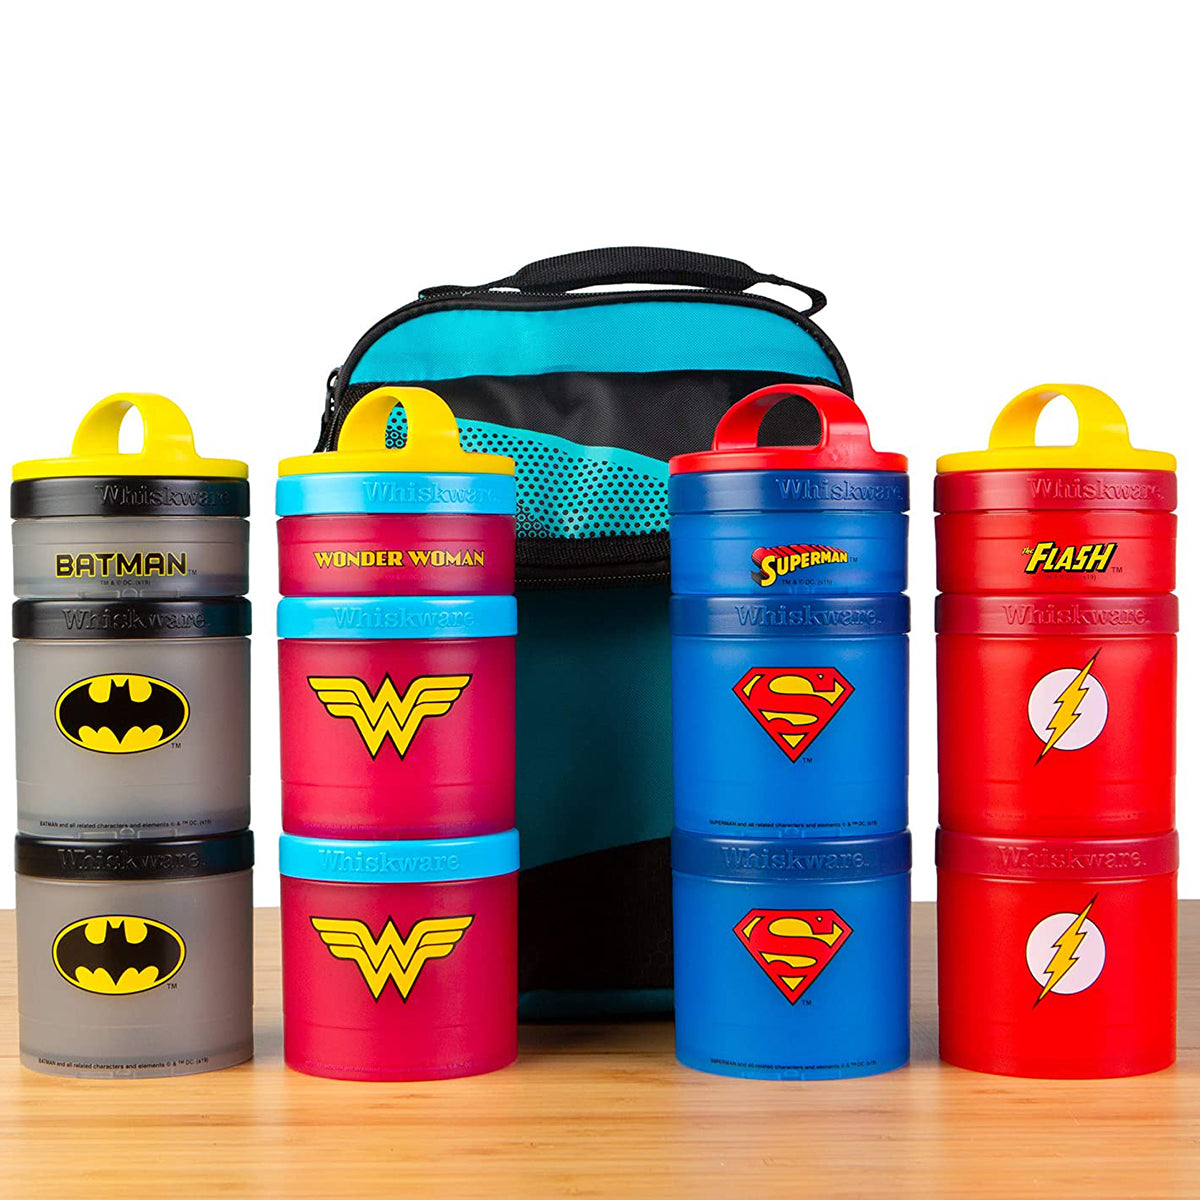 Whiskware DC Comics Stackable Snack Pack Containers Whiskware